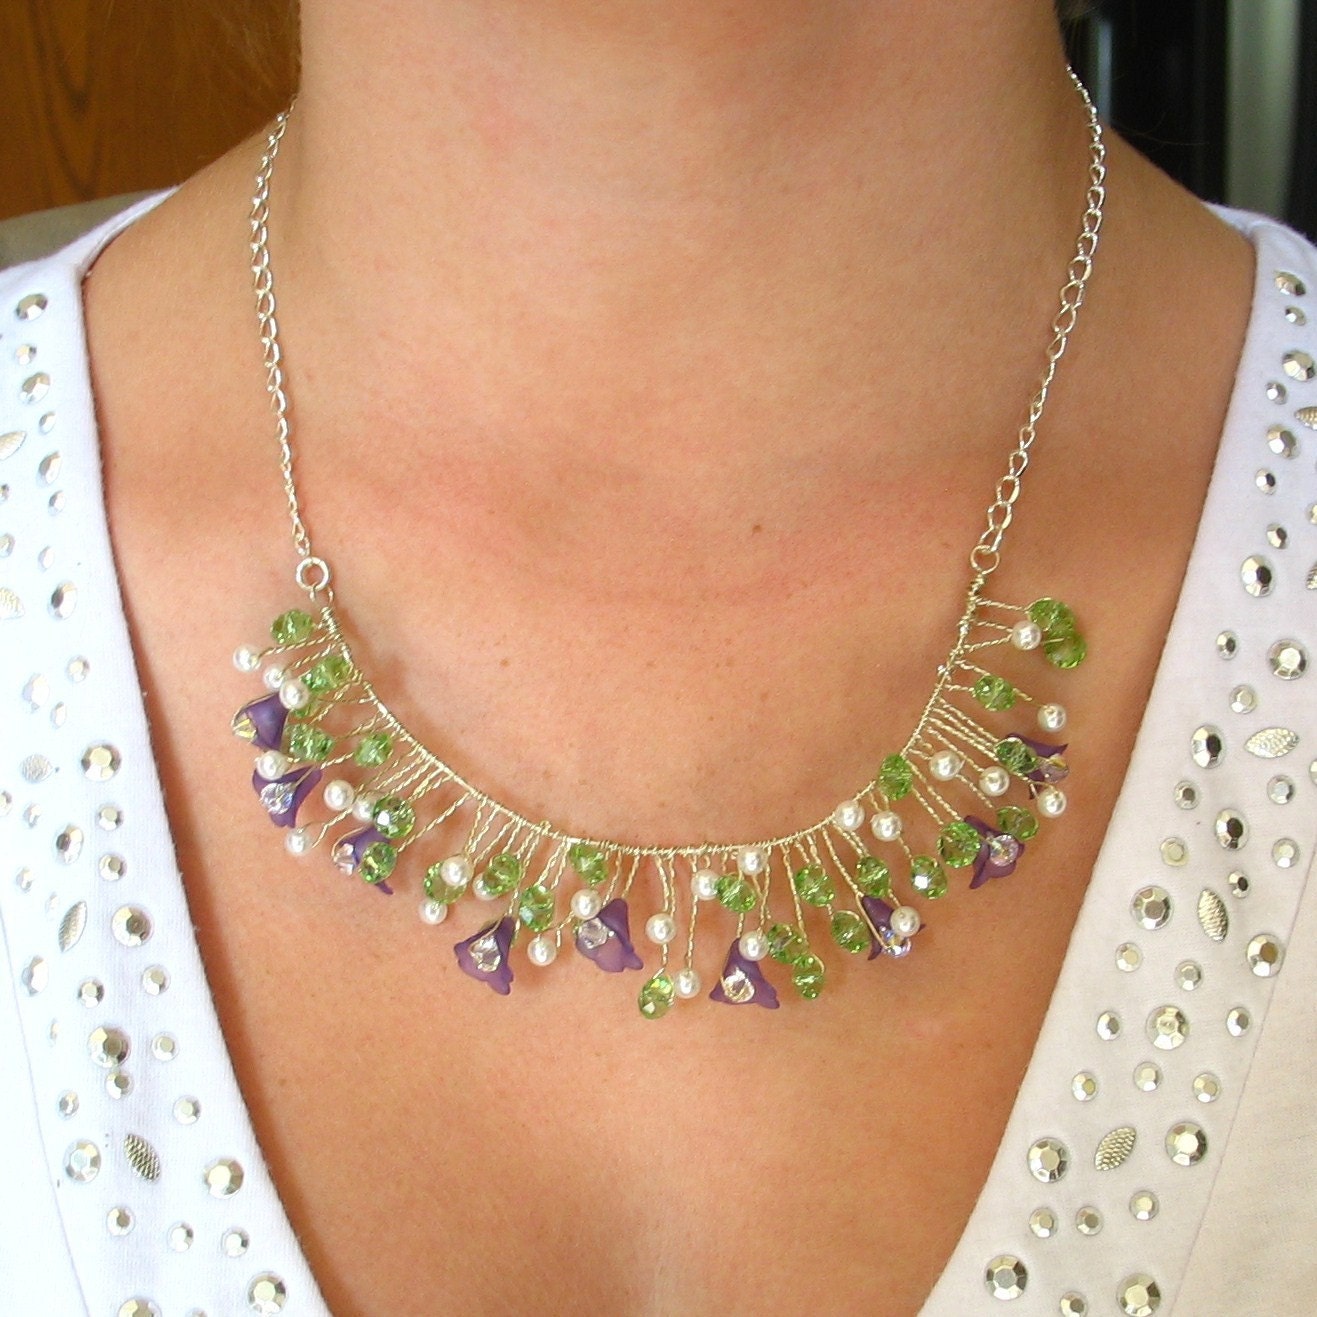 Purple Flower Beaded Wire Necklace Lucite Flower Jewelry Green Crystals White Pearls Floral Vine Handmade Jewellery